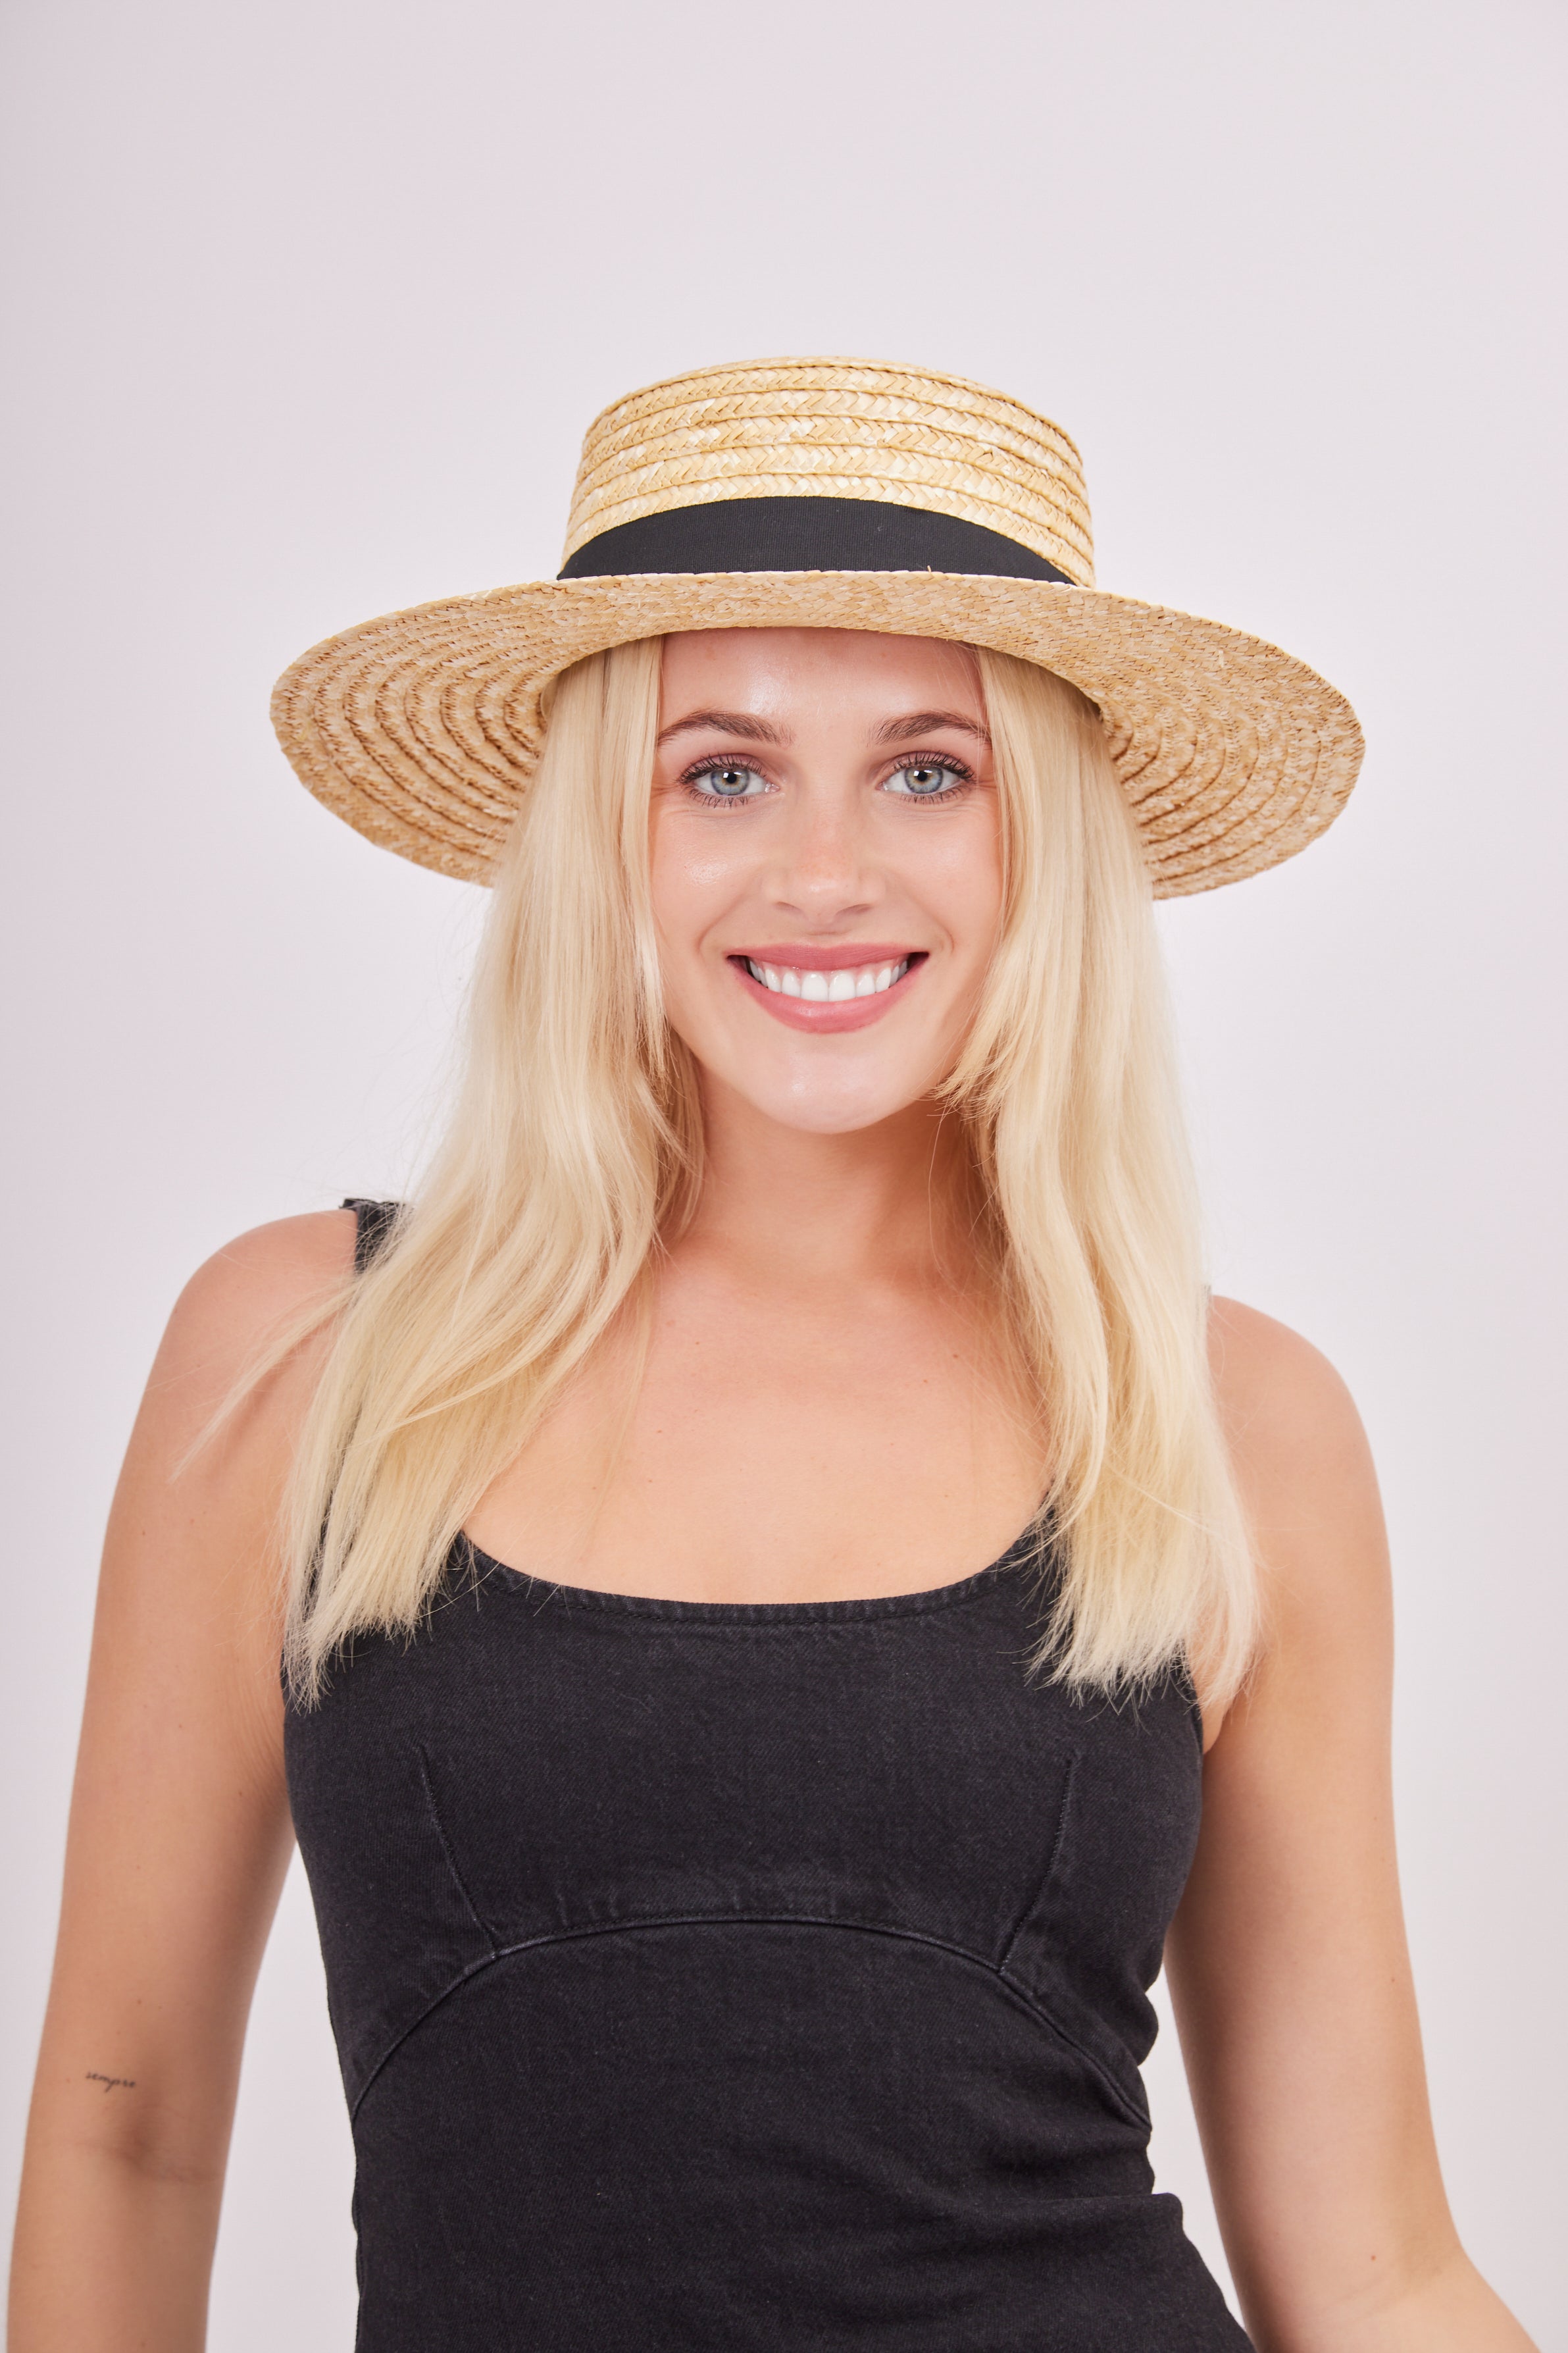 My Accessories London Boater Straw Hat With Grosgrain Bow Trim in Beige and Black | Beach | Holiday | Summer | Races | Occasion | Accessory | Hat | Hats | Women's | Women's Accessories | Coquette | Cottage |